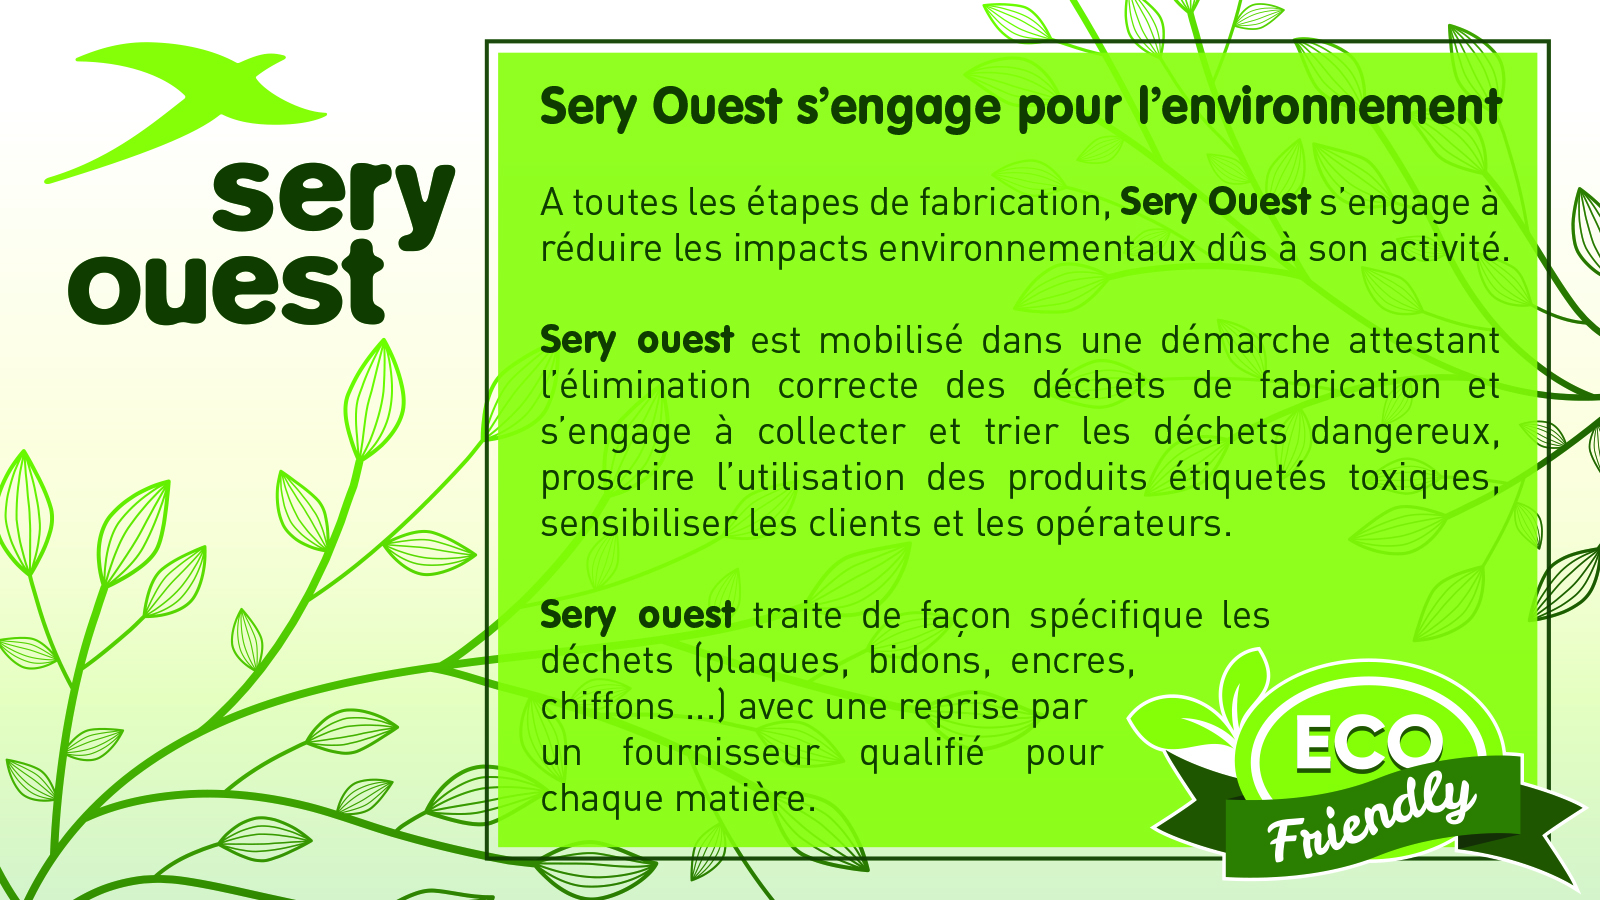 SERY-OUEST-ECO_FRIENDLY-V2-H